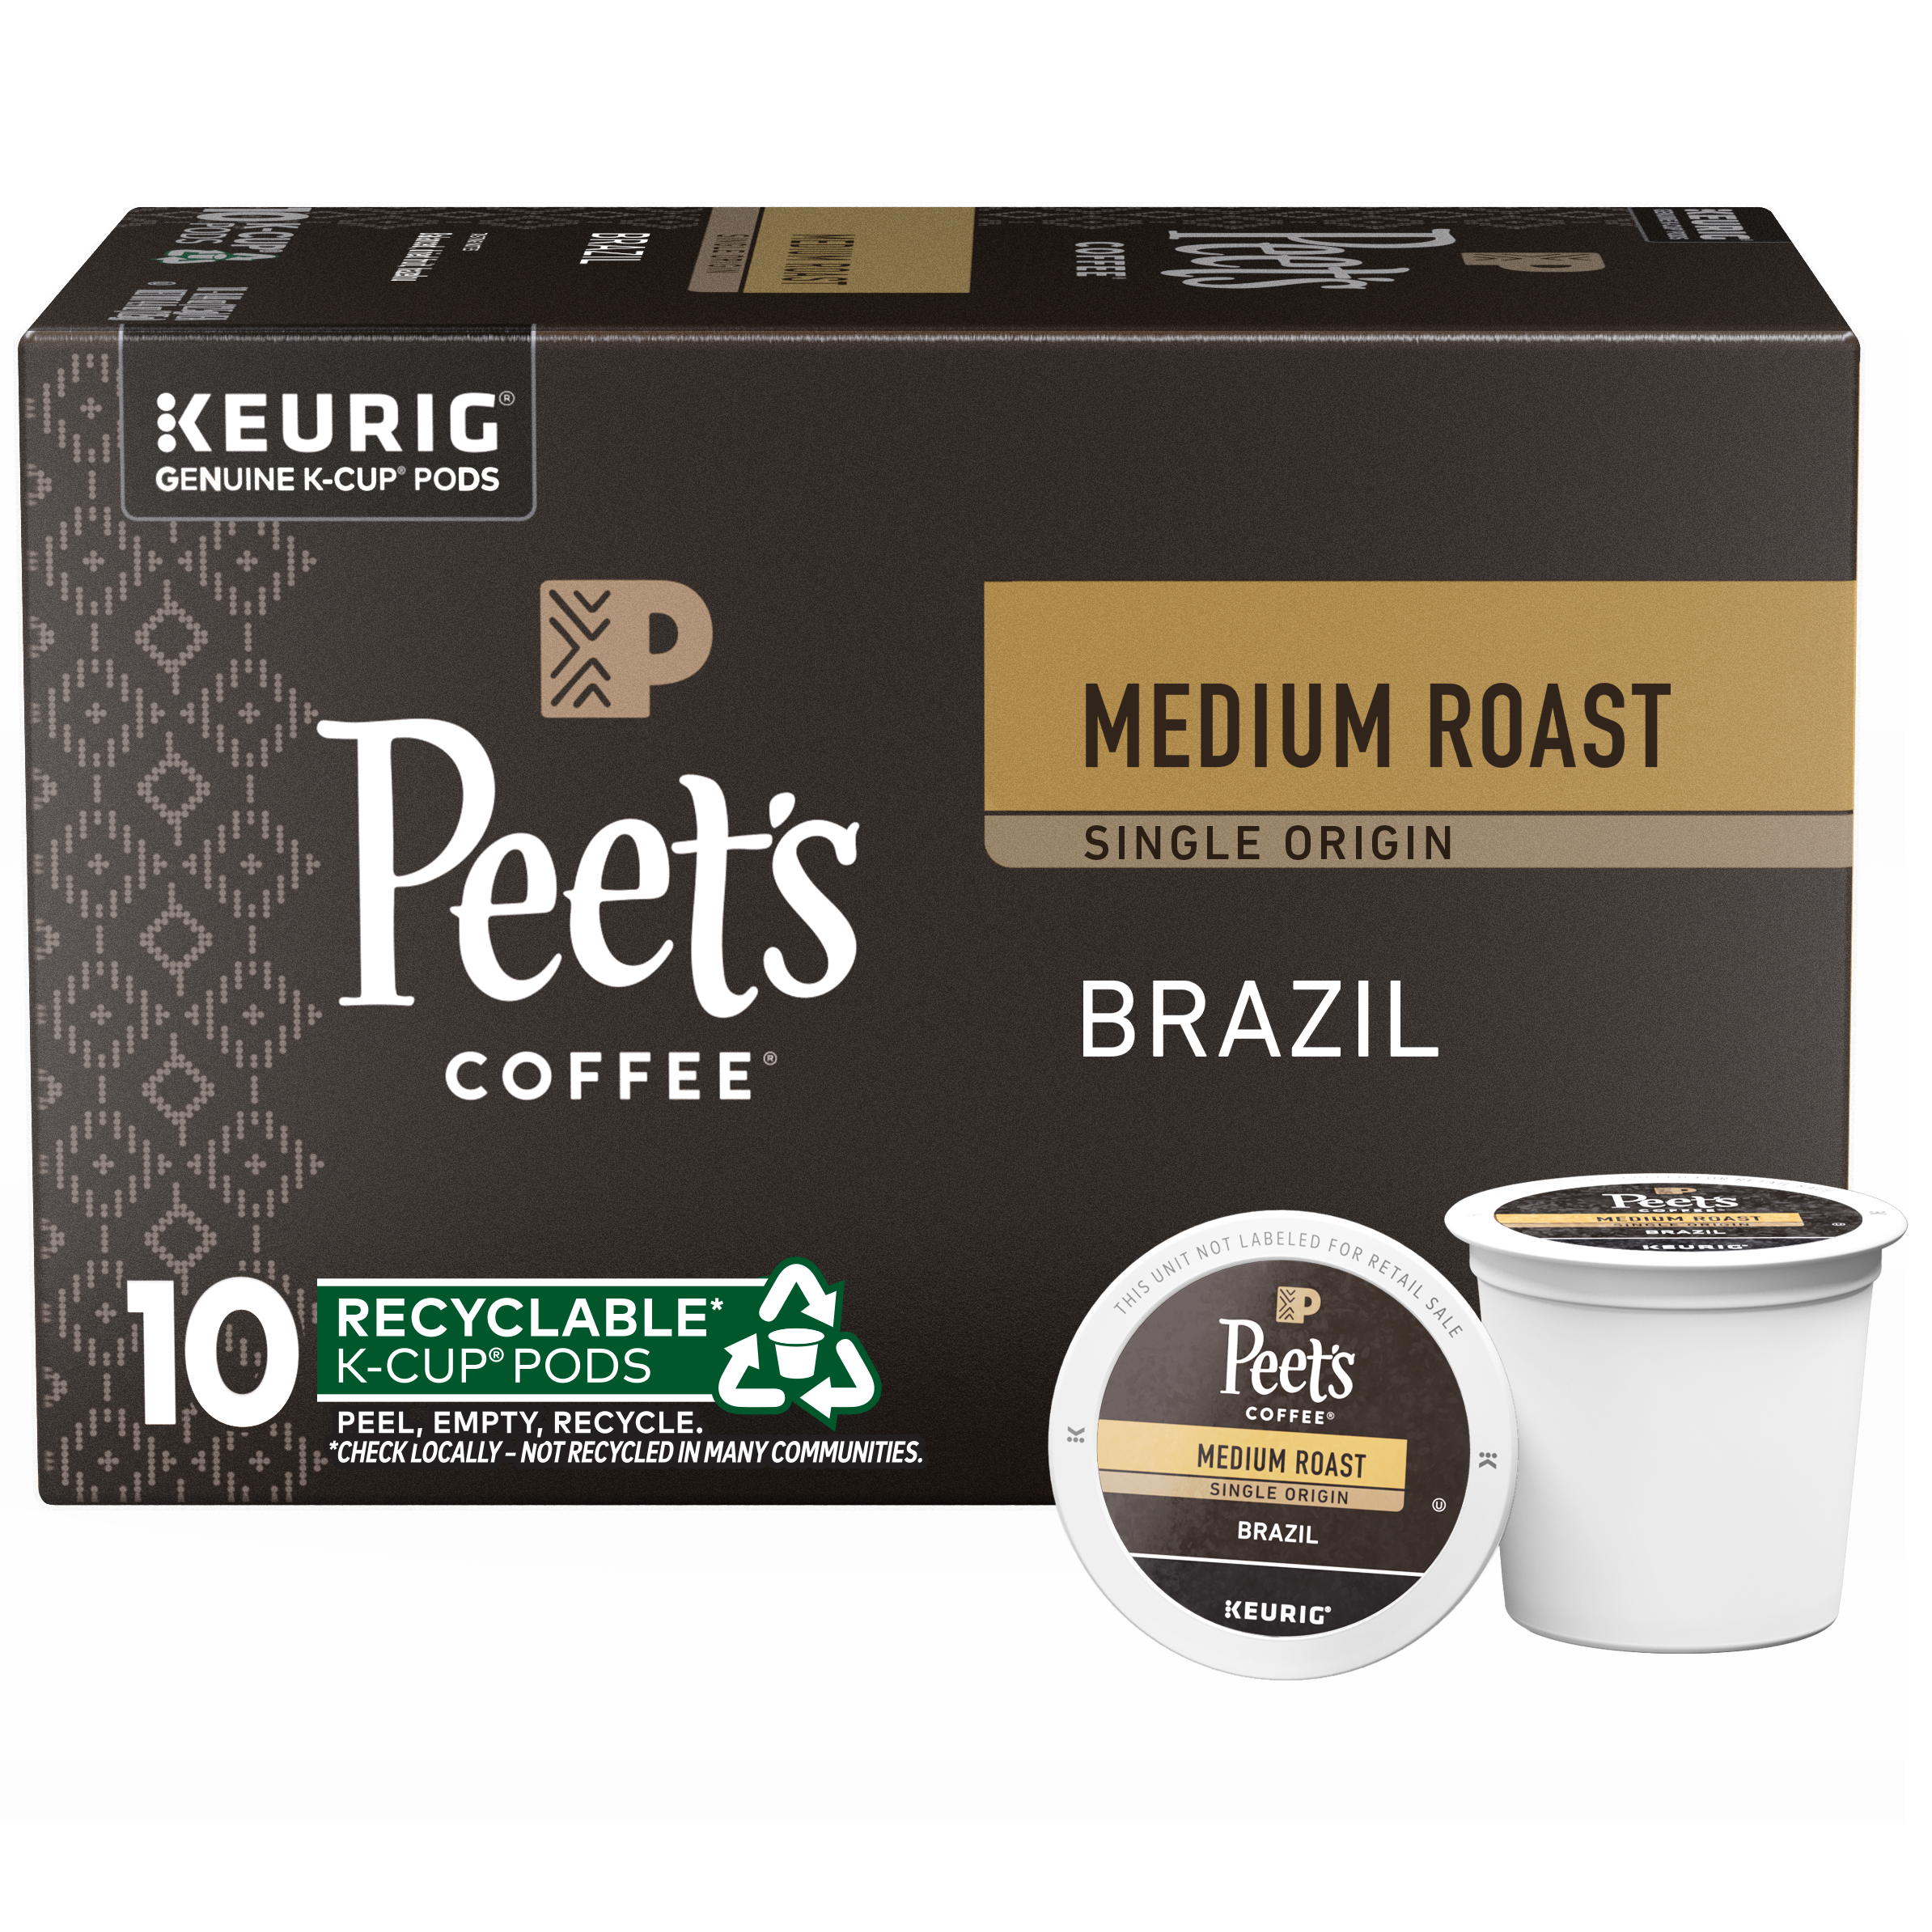 L'OR Coffee & Espresso Combo Pack with Peet's Coffee